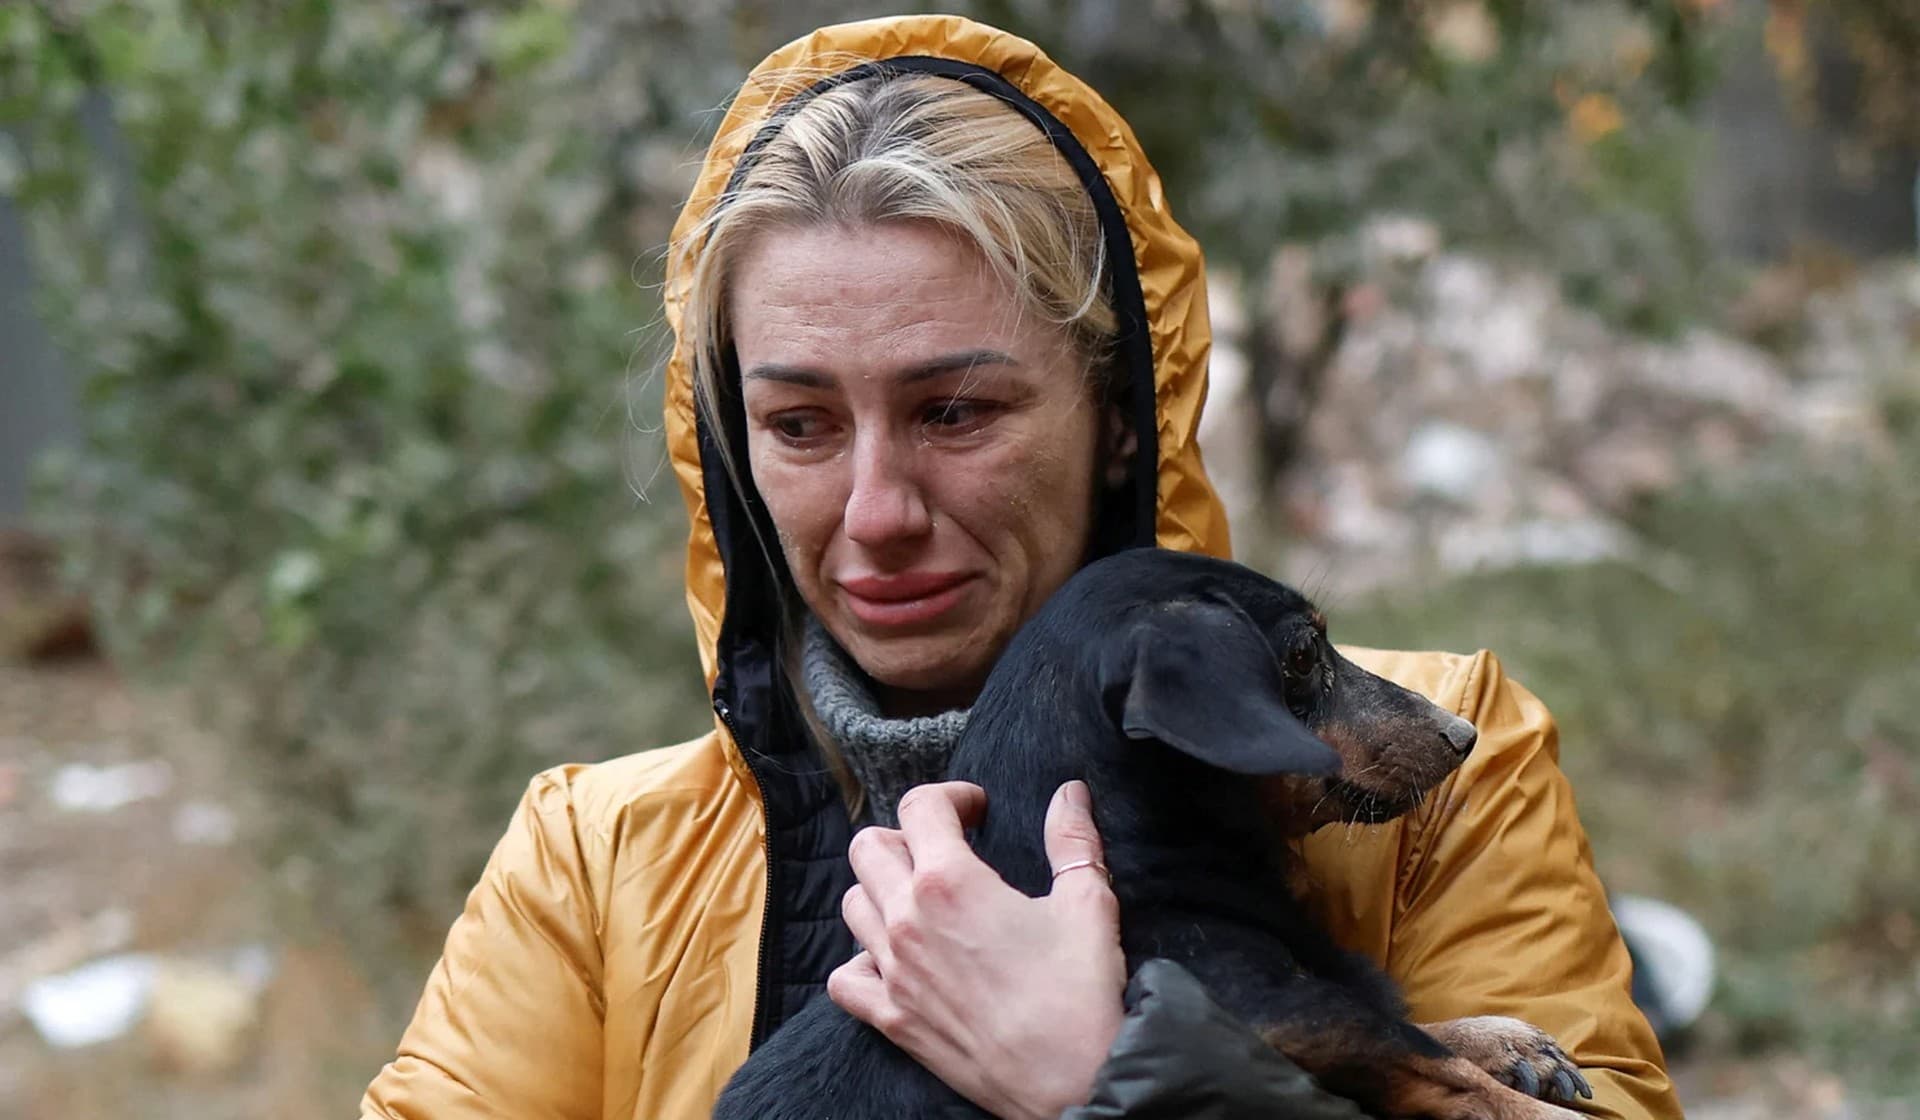 Local resident Kseniia, who survived a Russian missile attack, cries as she holds her dog released by rescuers from the debris of a residential building in Mykolaiv